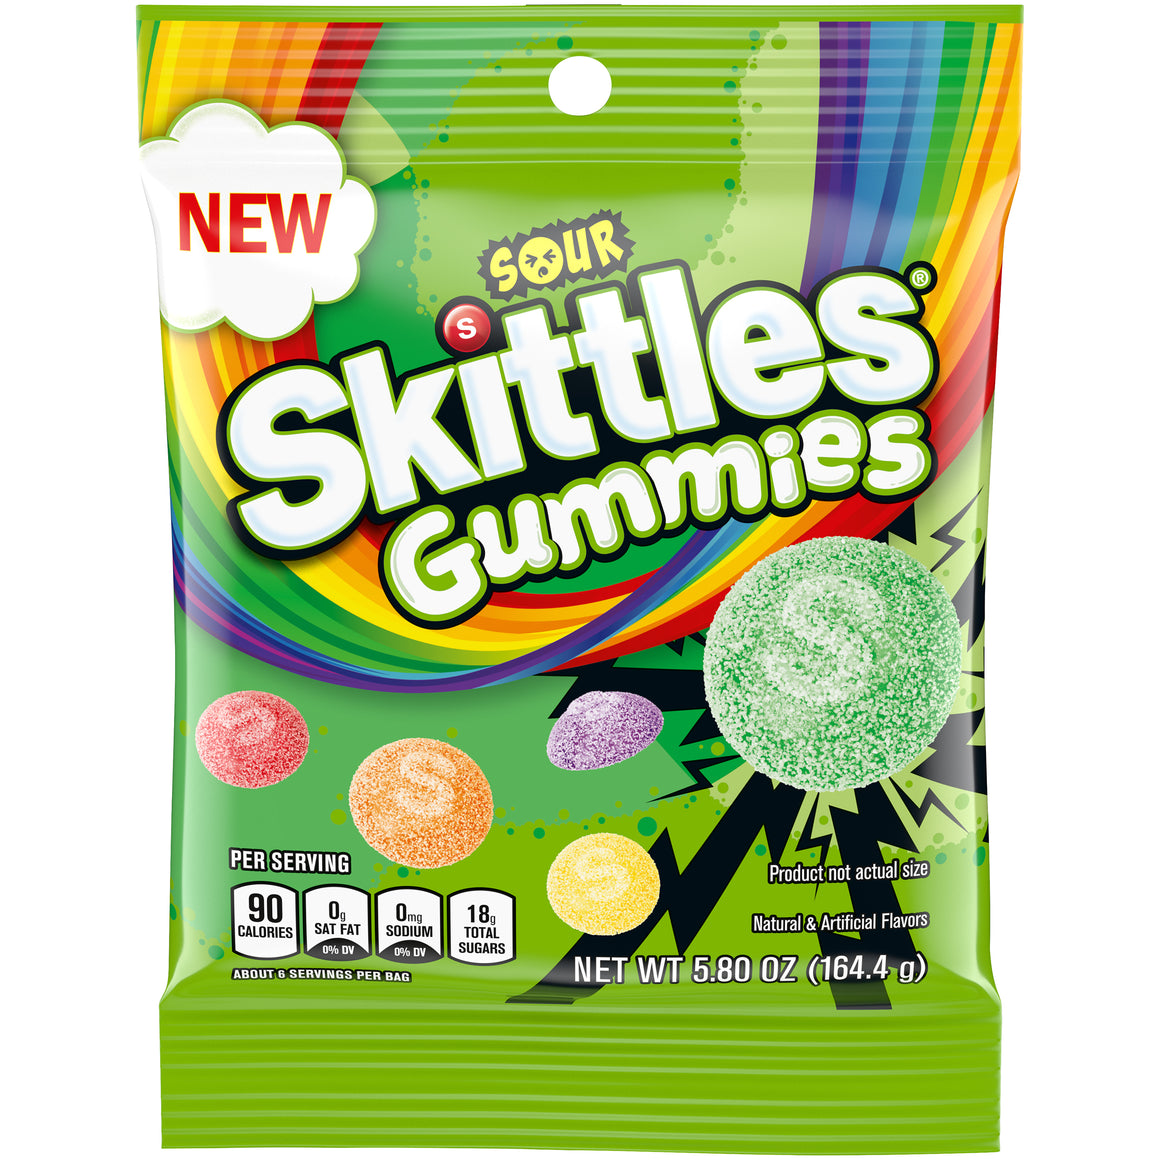 All City Candy Sour Skittles Gummies 5.8 oz. Bag Gummi Wrigley For fresh candy and great service, visit www.allcitycandy.com